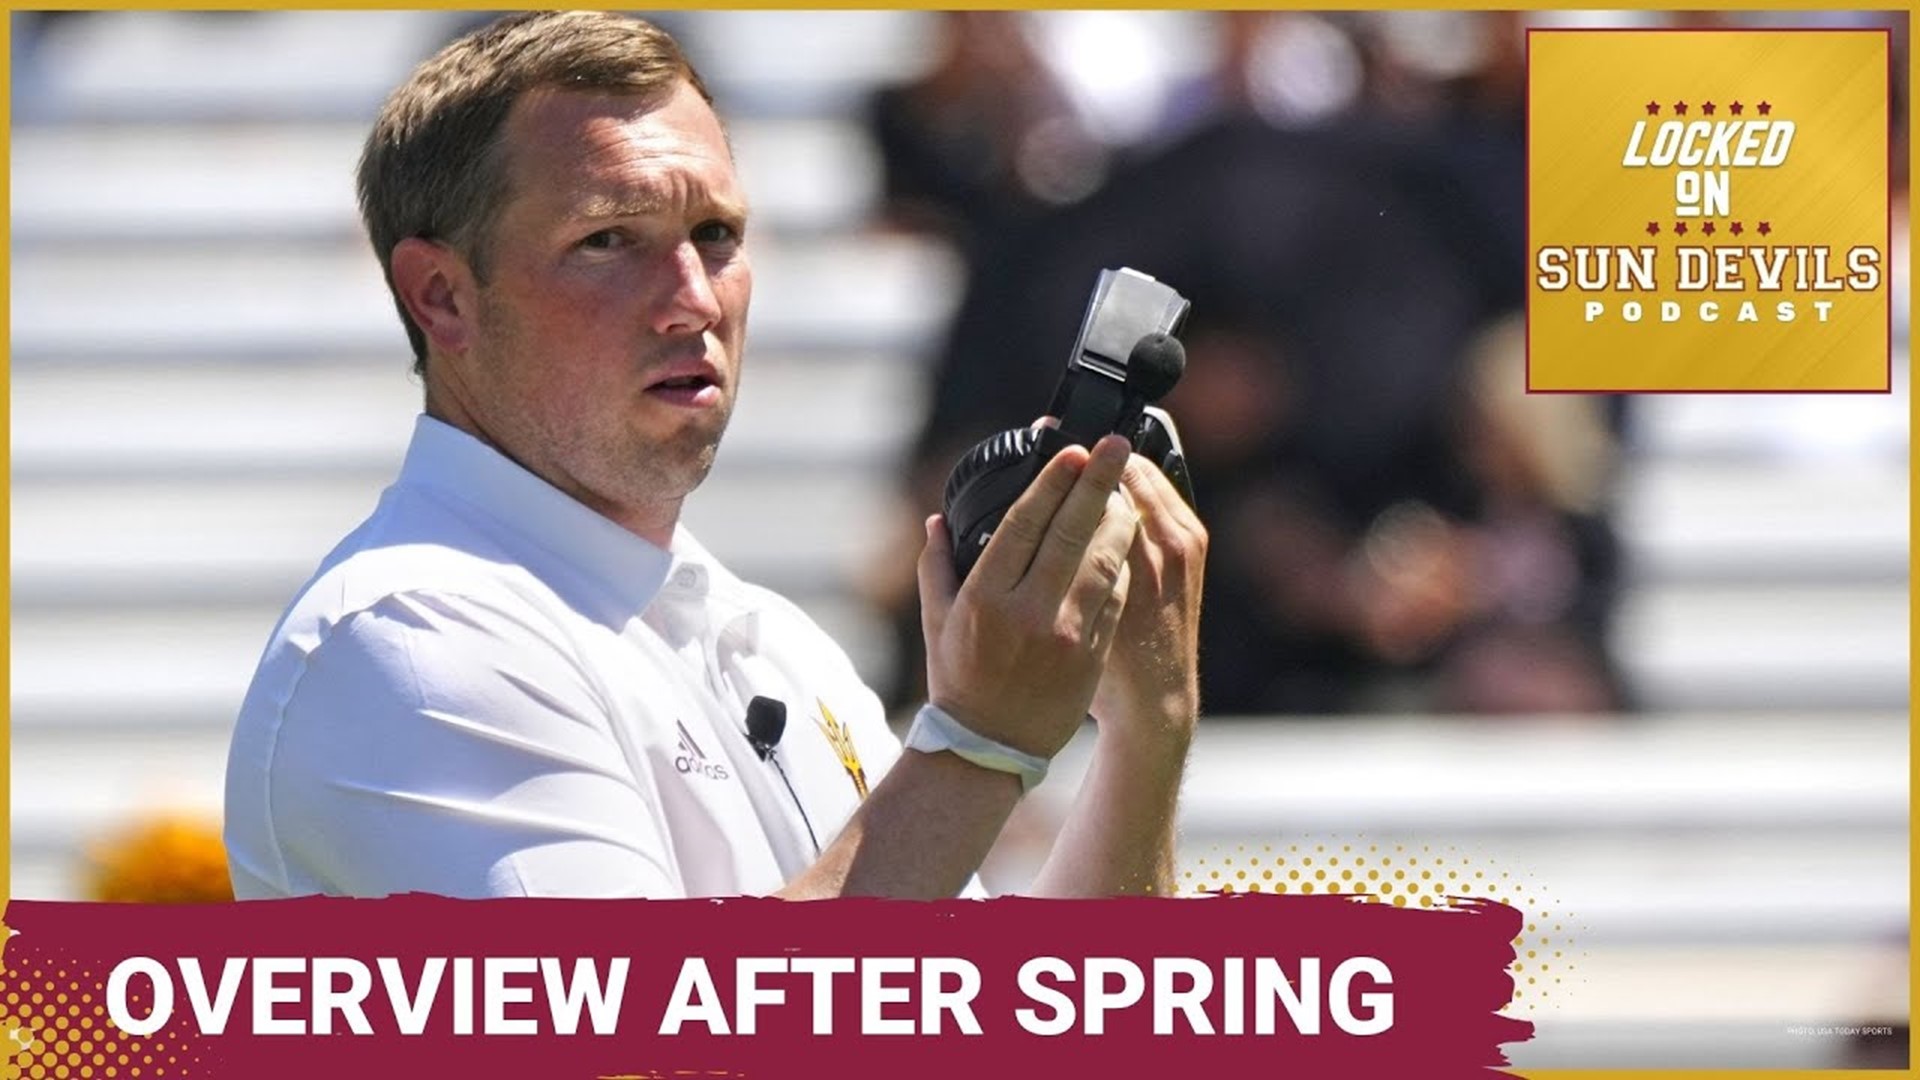 With spring practices all wrapped up, it's time we take another broad look at Arizona State Sun Devils football and the progress they made this spring.